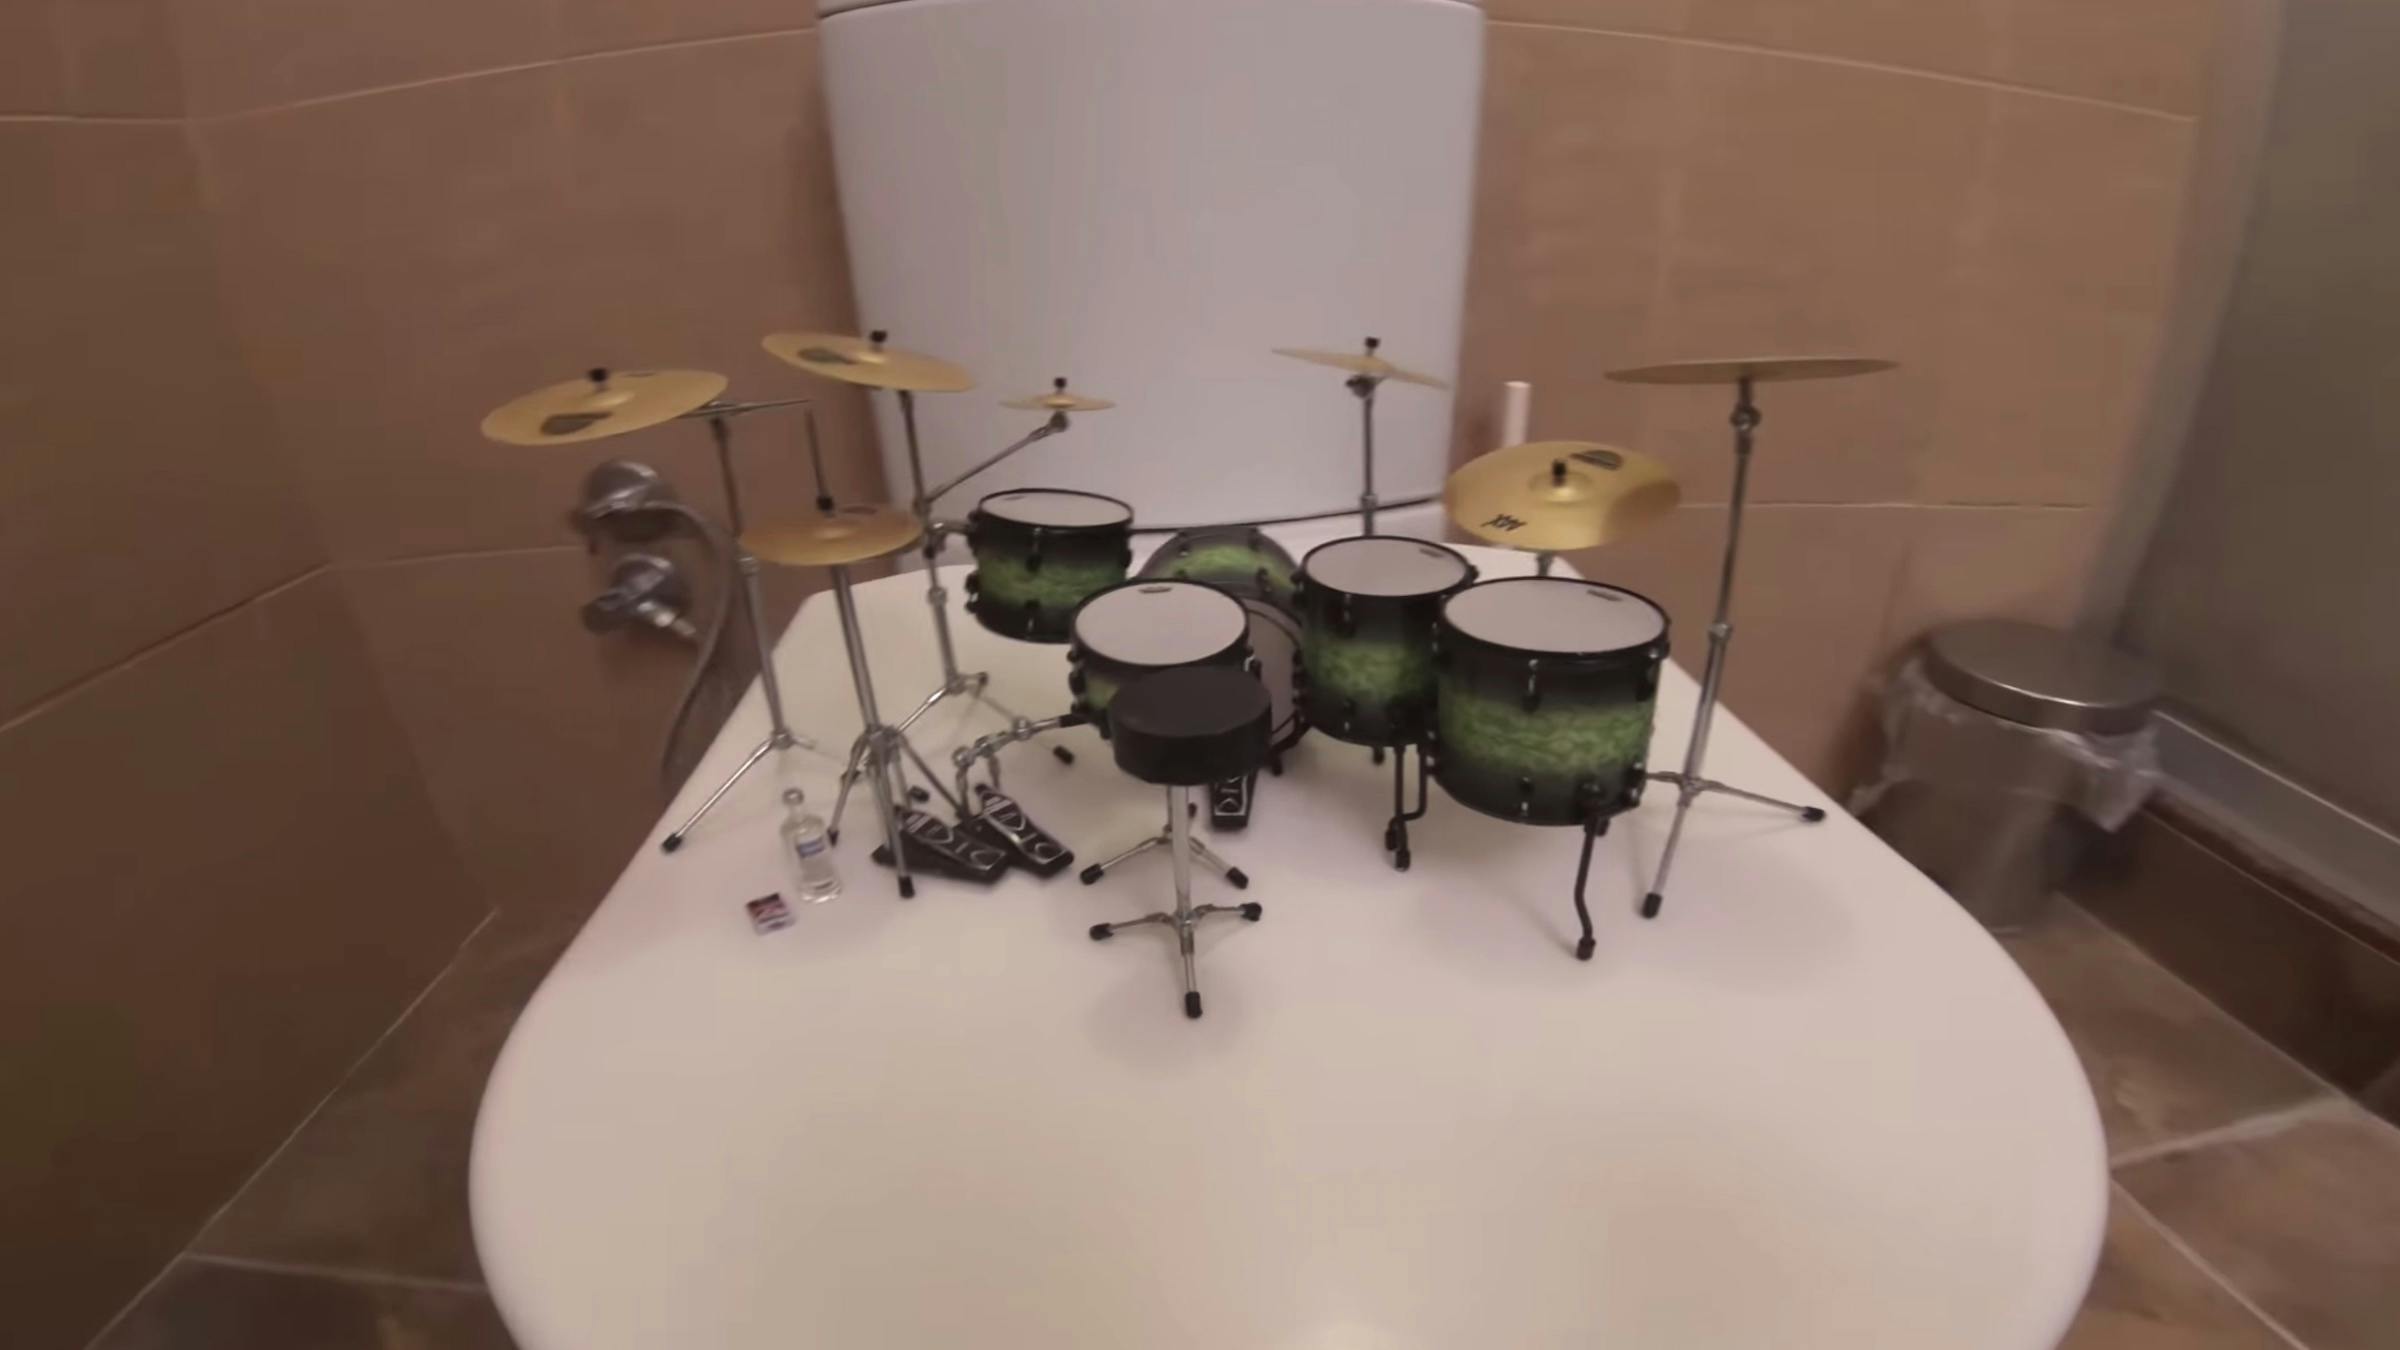 Watch Green Day, System Of A Down, and More Covered On Teeny Tiny Drums